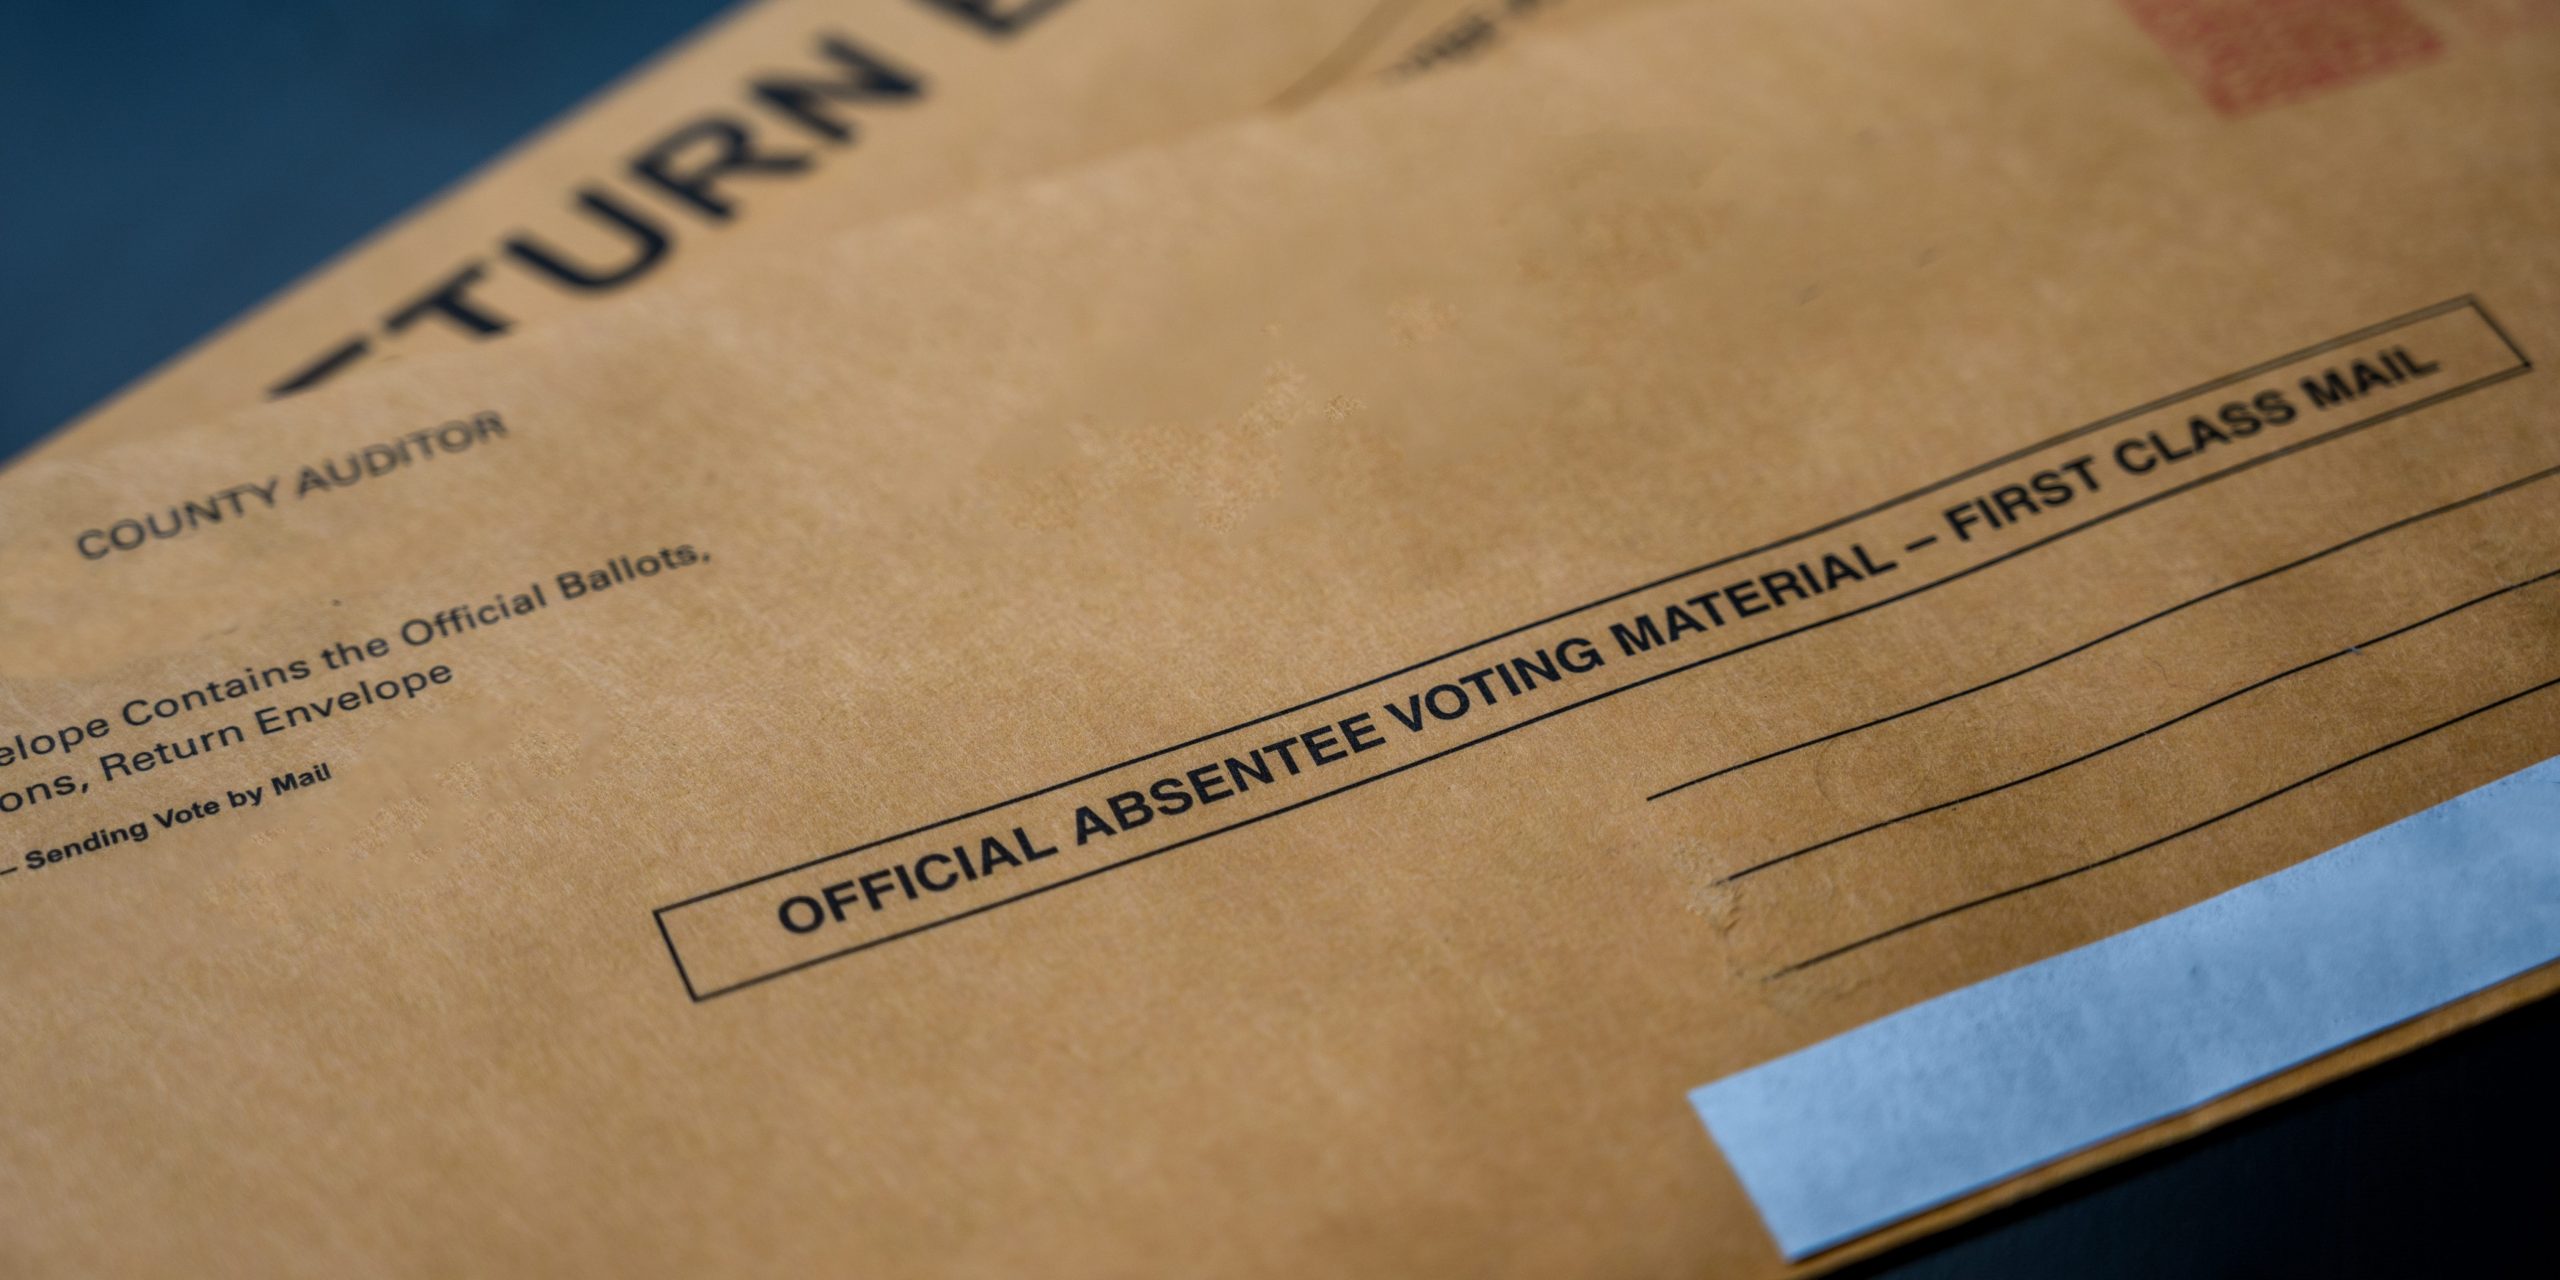 Absentee voting material typically sent to voters for elections